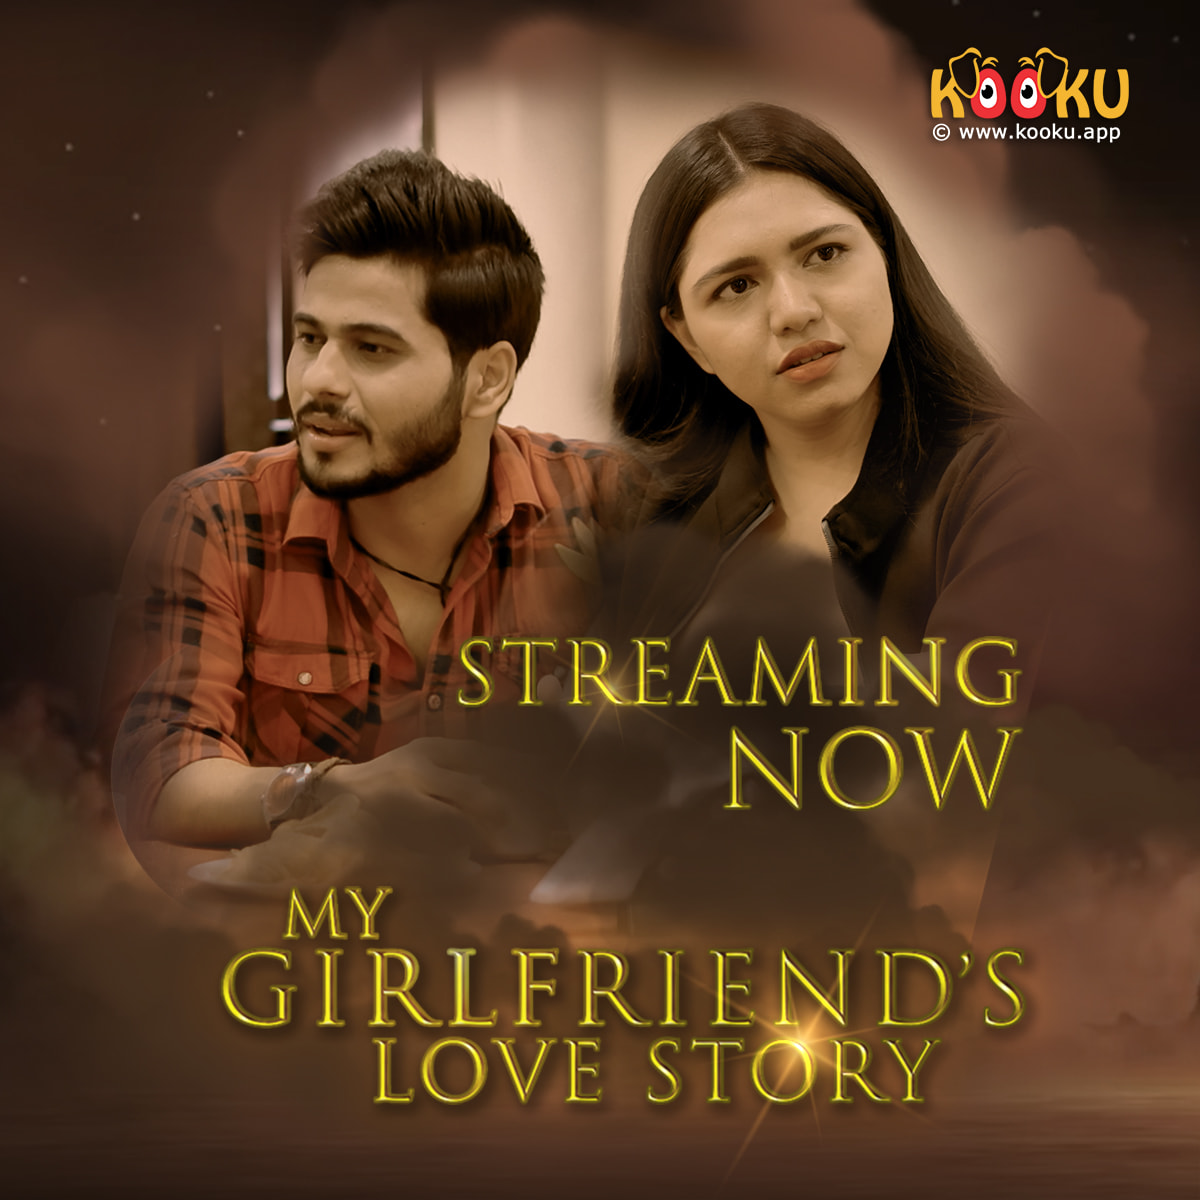 You are currently viewing 18+ My Girlfriends Love Story 2020 Hindi Complete Kooku App Web Series 720p HDRip 400MB Download & Watch Online